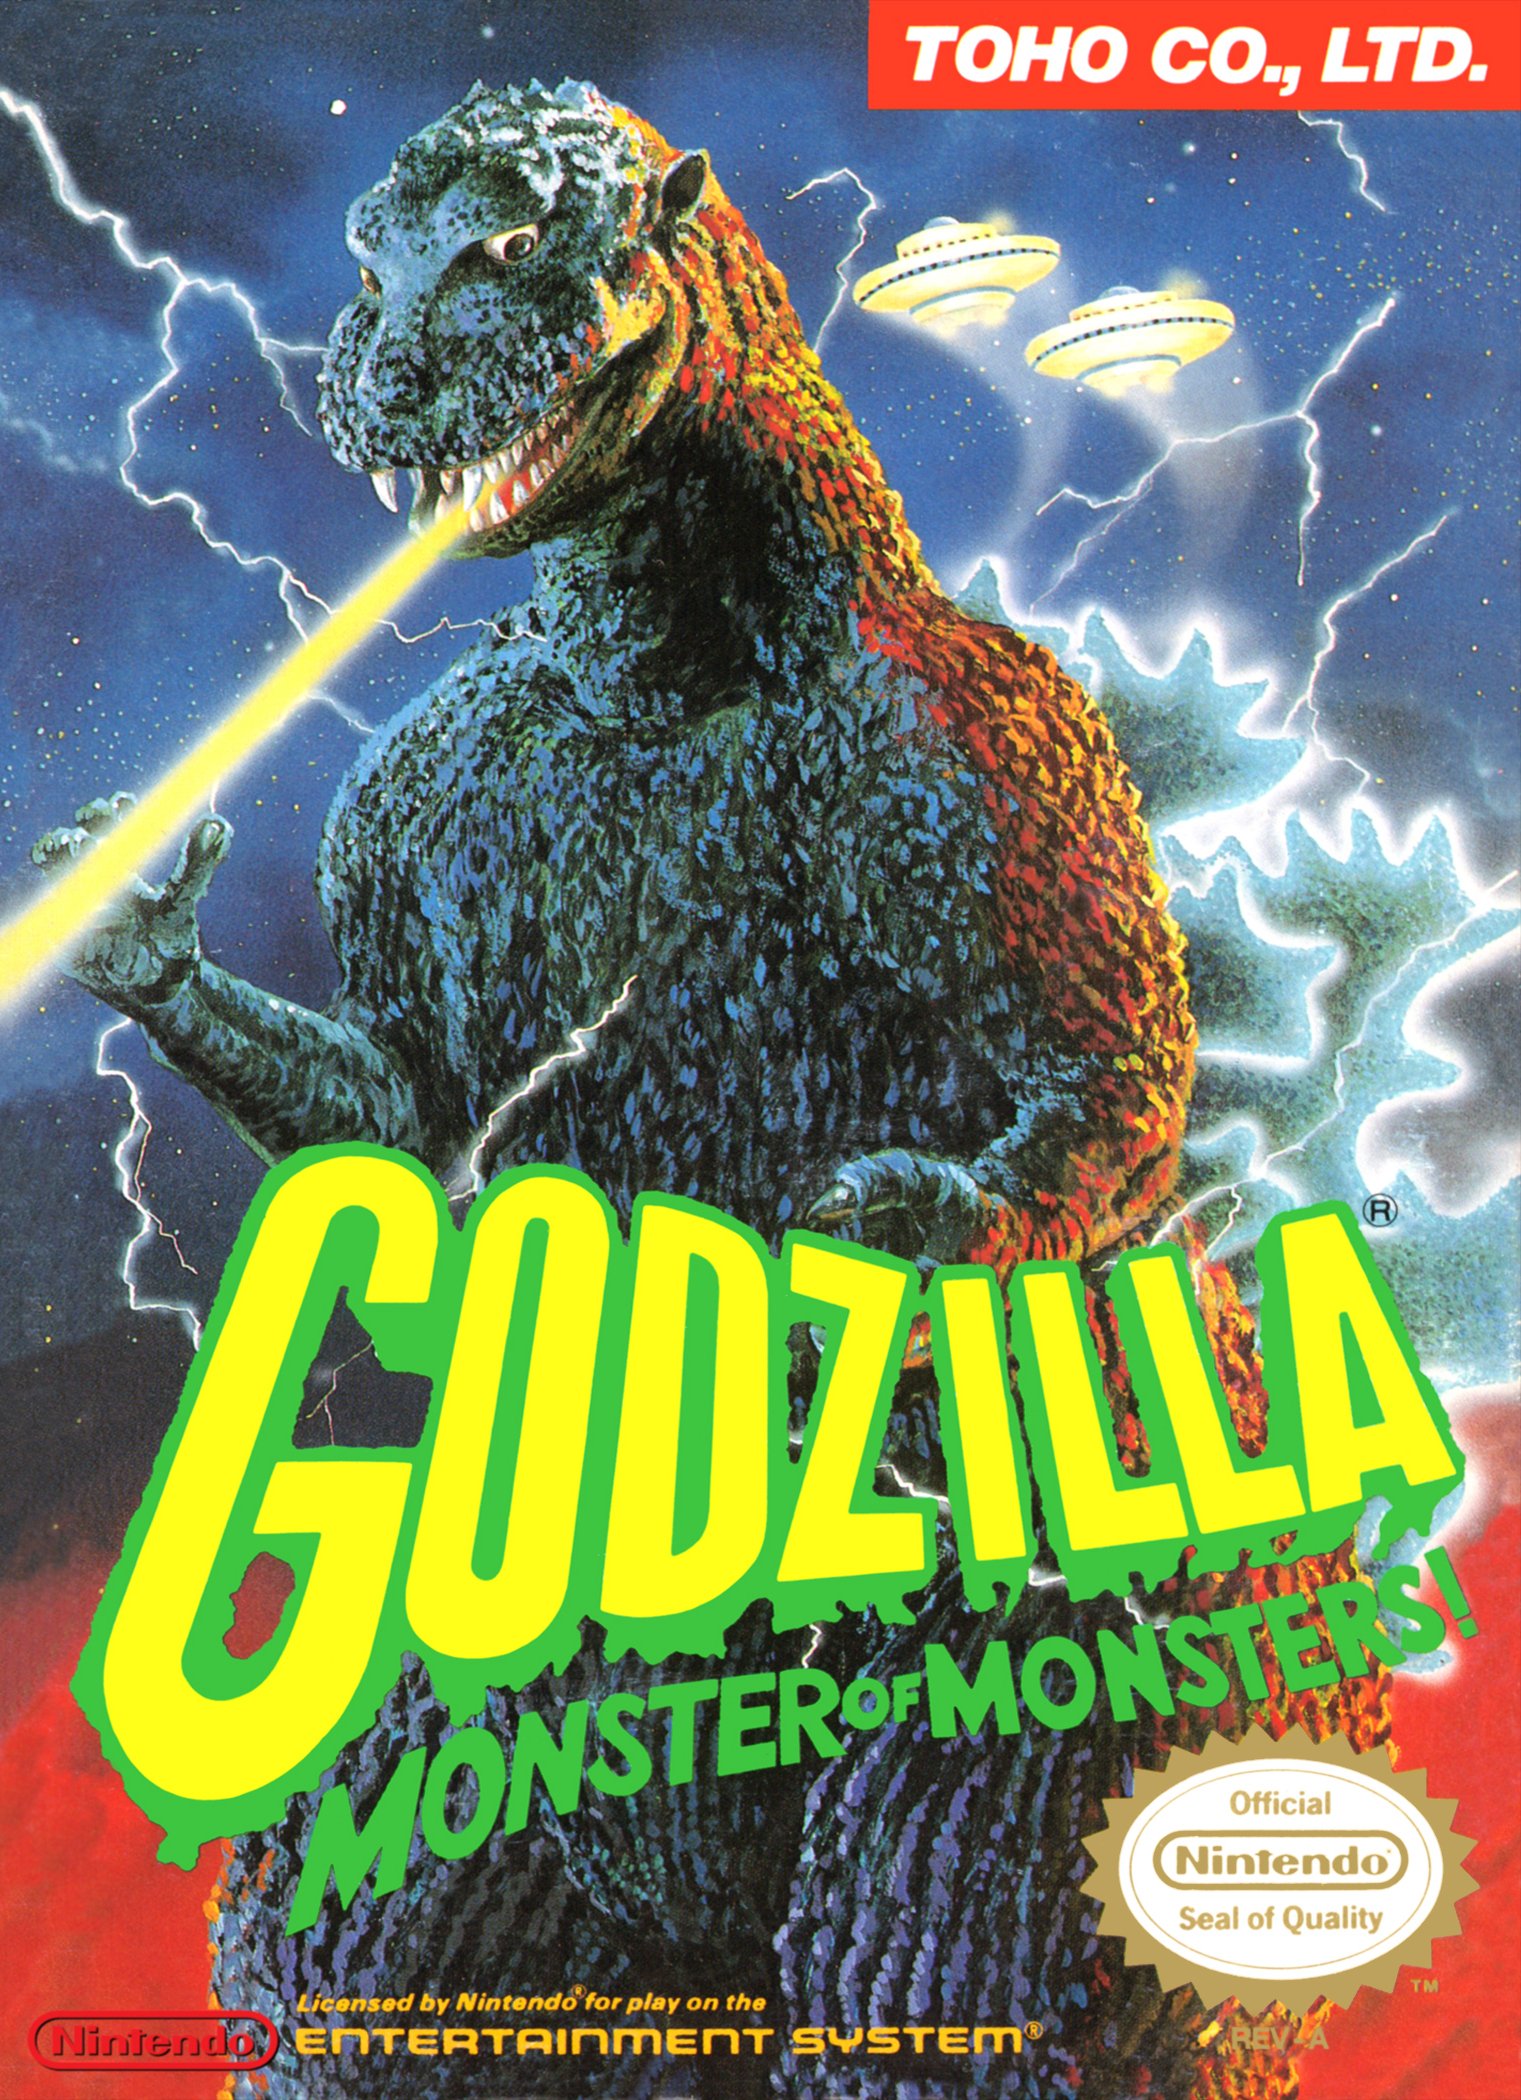 Image of Godzilla: Monster of Monsters